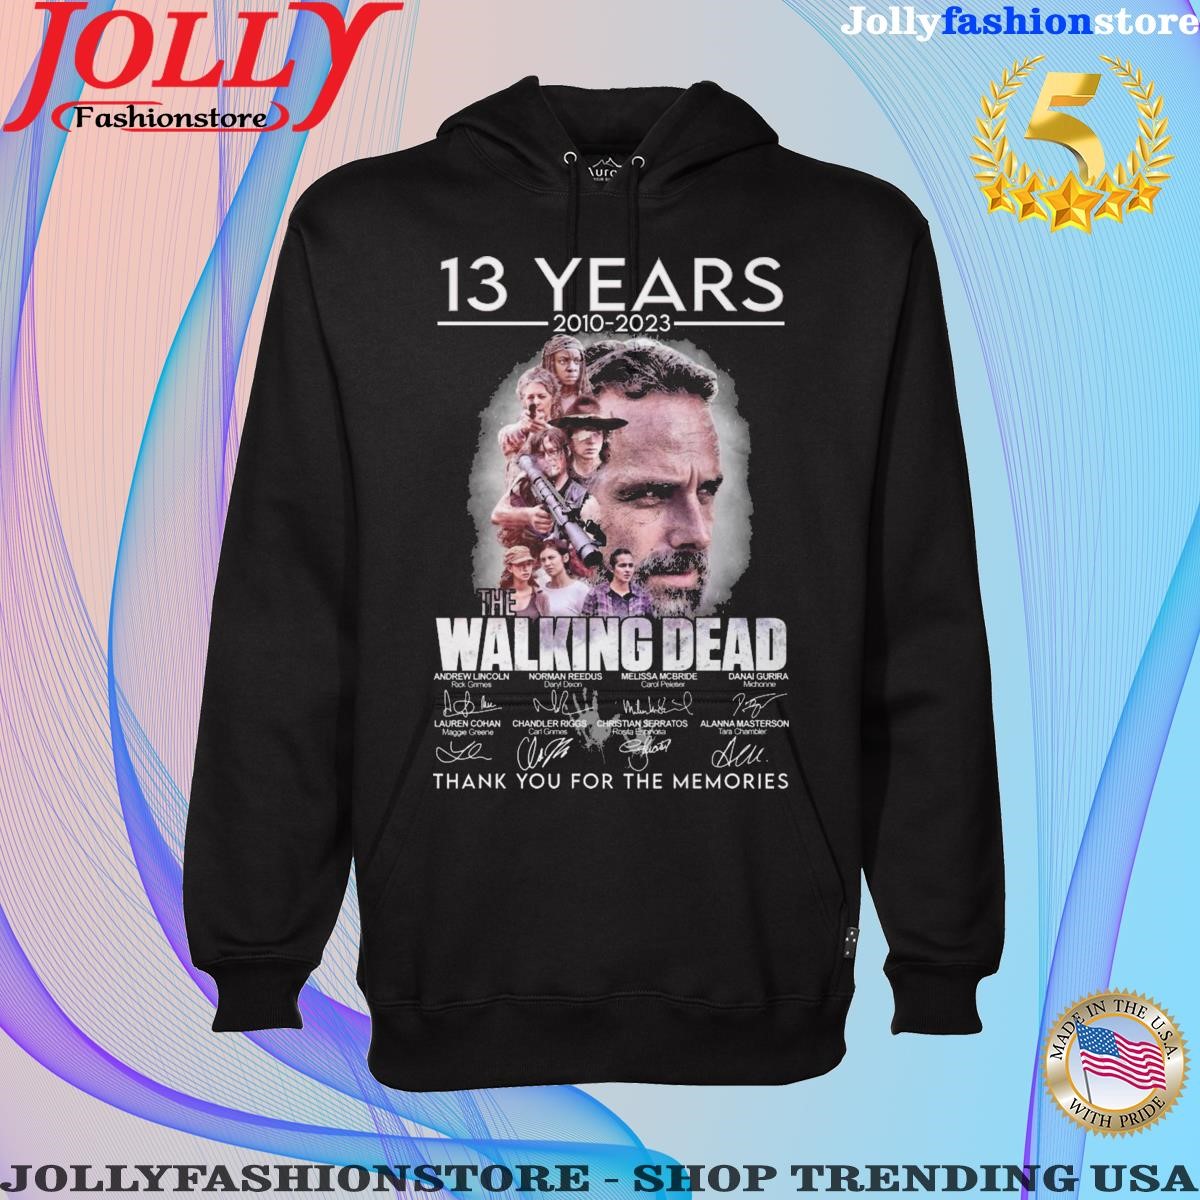 13 years 2010 2023 the walking dead thank you for the memories signatures shirt Hoodie shirt.png